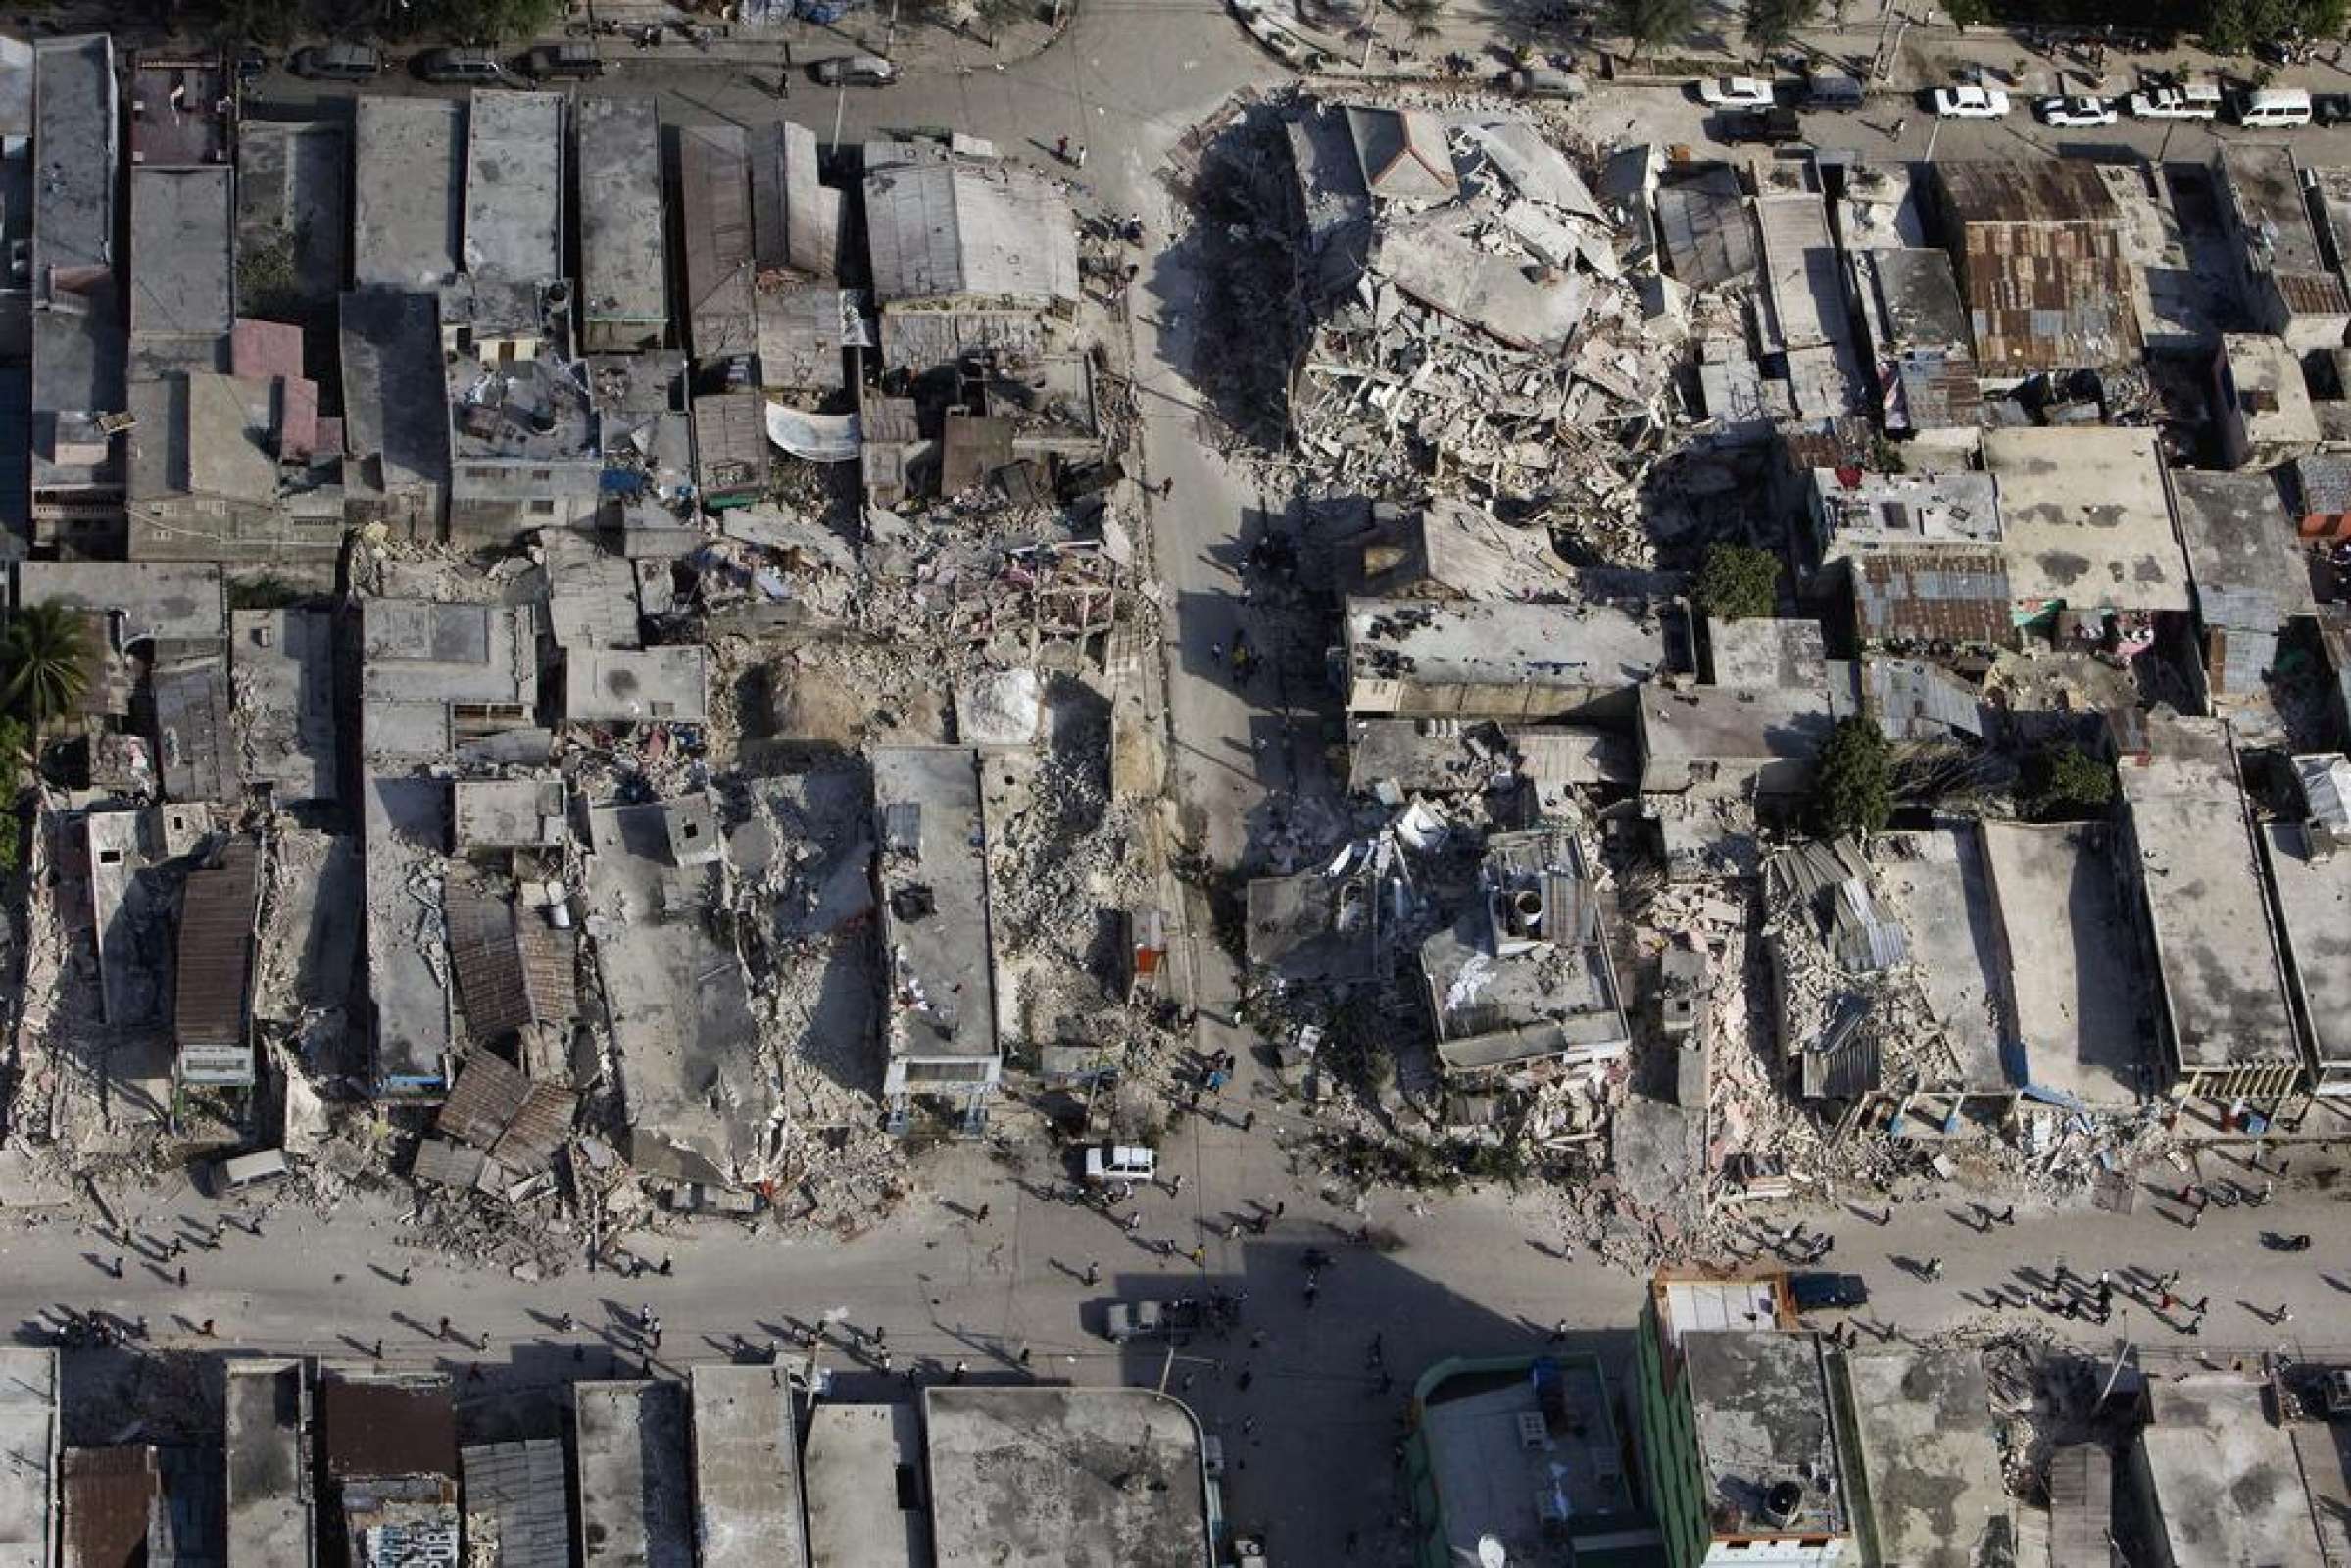 An Aerial View Of The Damage In Port Au Prince Haiti After An Earthquake Measuring 7 Plus On The Richter Scale Hit In January 2010